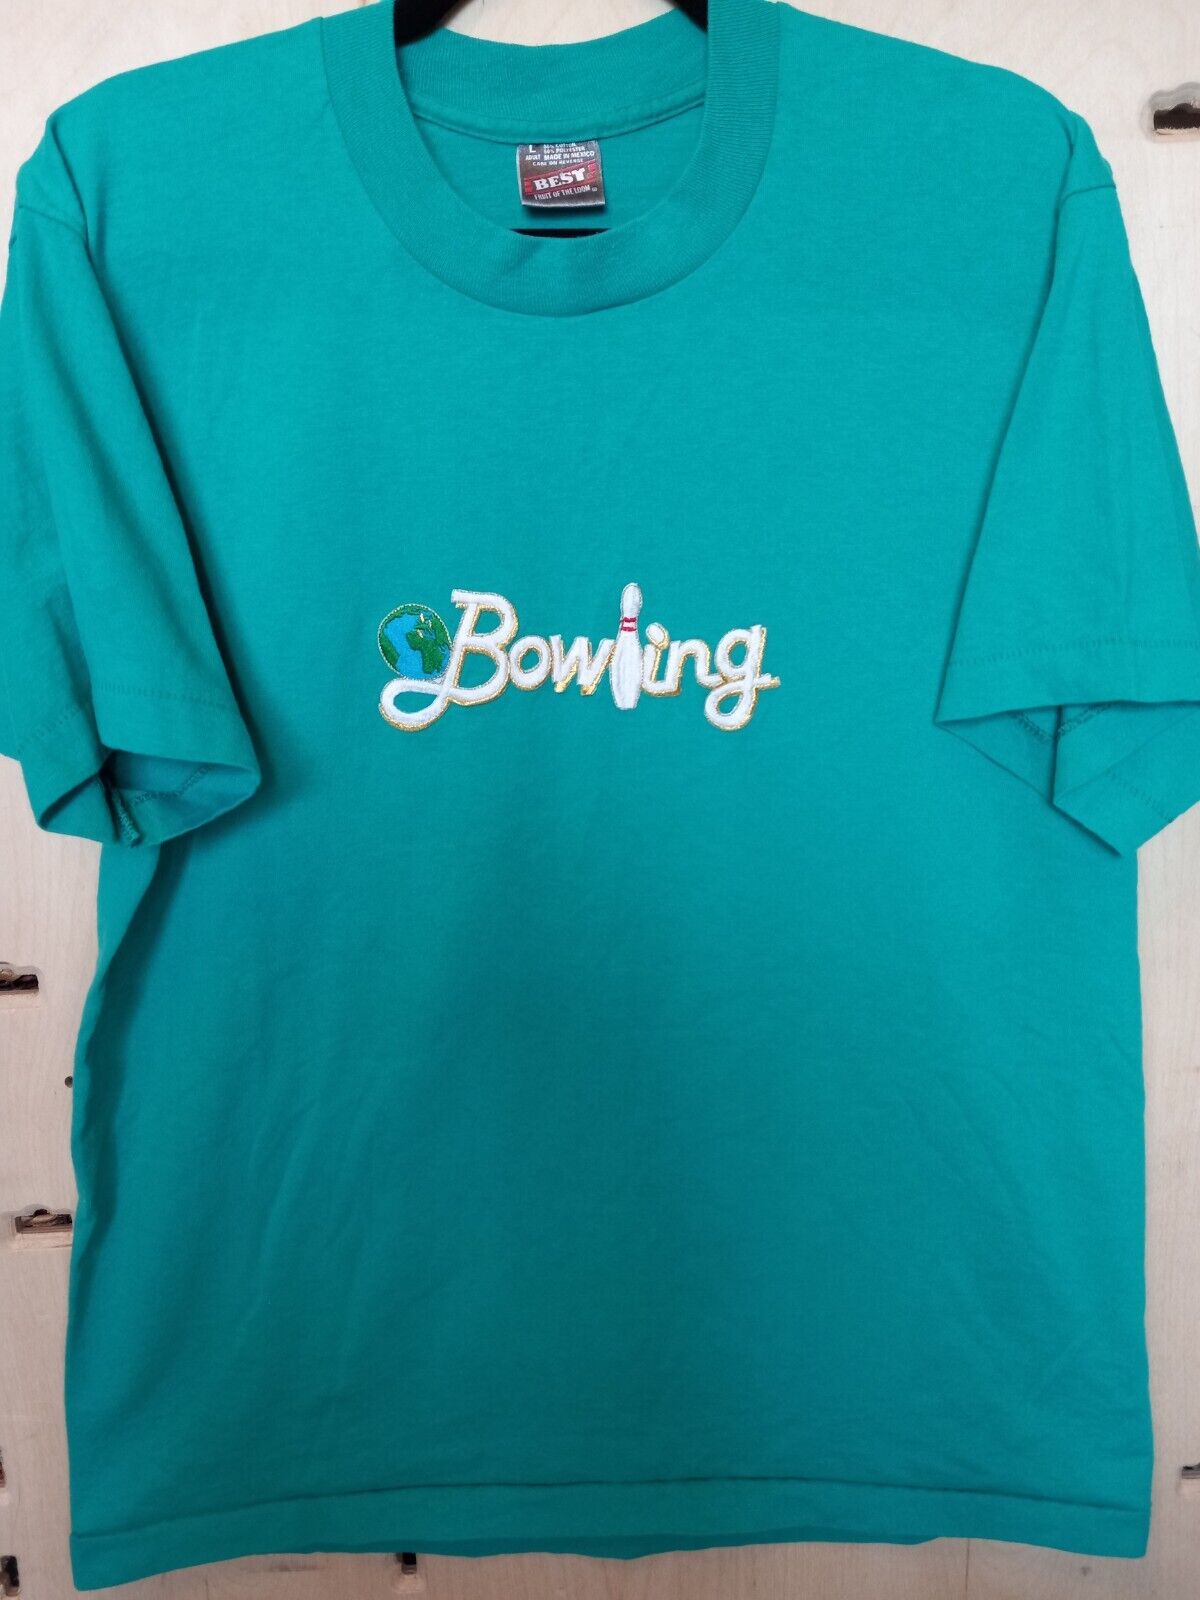 Vintage 90s Bowling Fruit of the Loom Single Stitch Shirt size L